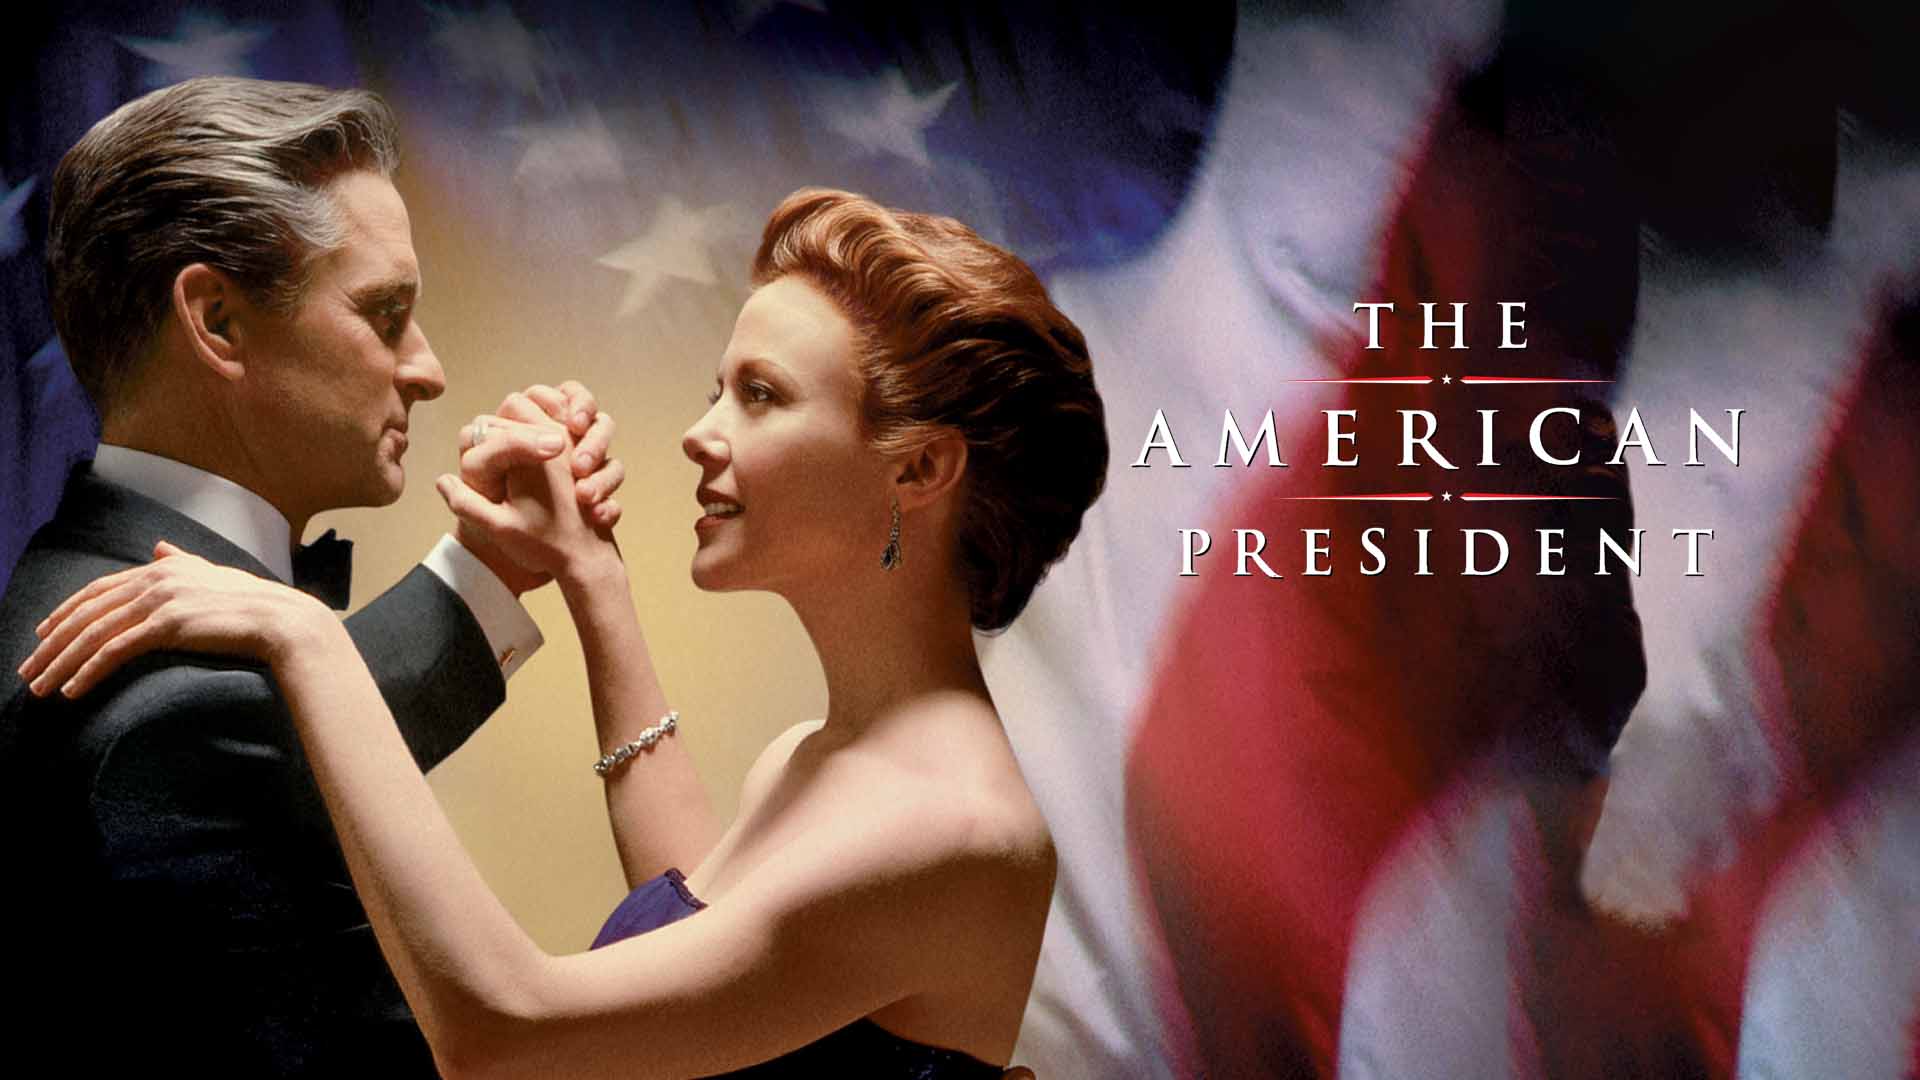 Watch The American President Online | Stream Full Movies